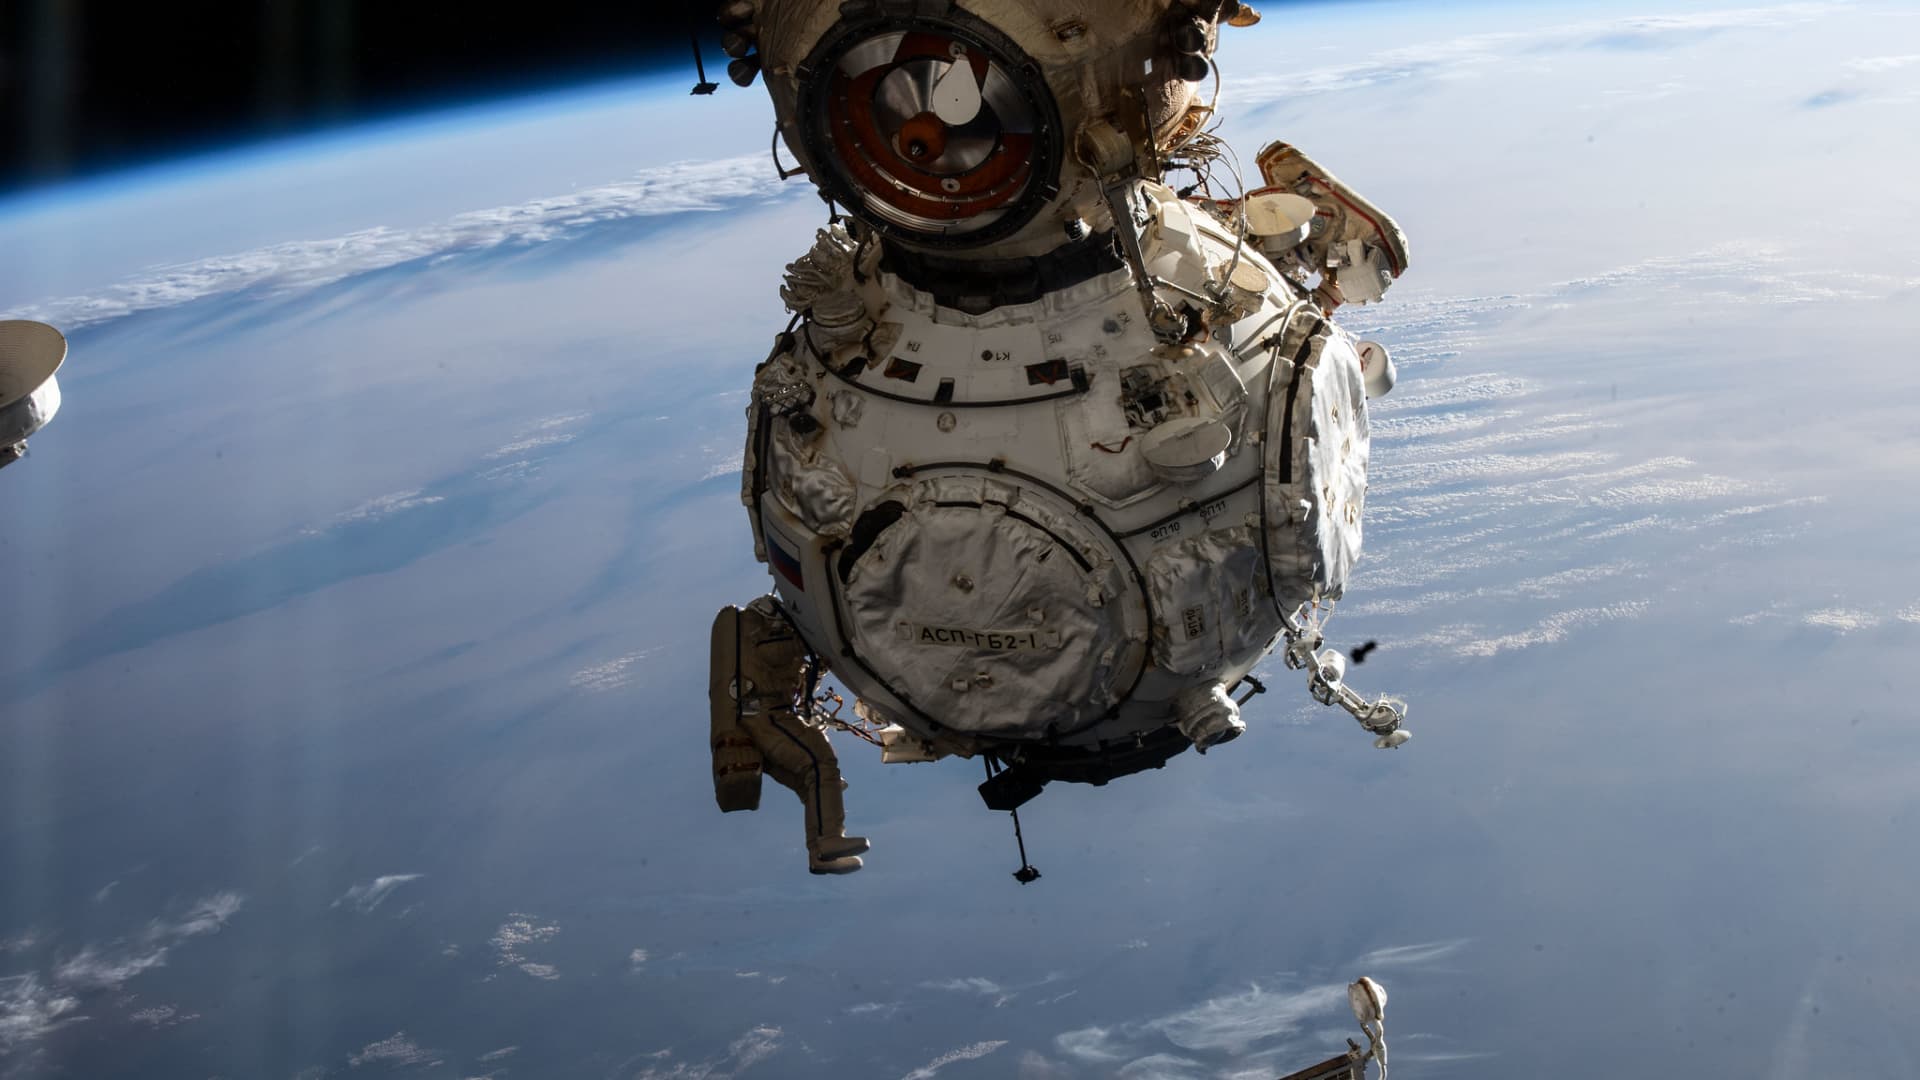 Russian cosmonauts Pyotr Dubrov and Anton Shkaplerov attach a new module to the country's segment of the International Space Station during a spacewalk on Jan. 19, 2022.